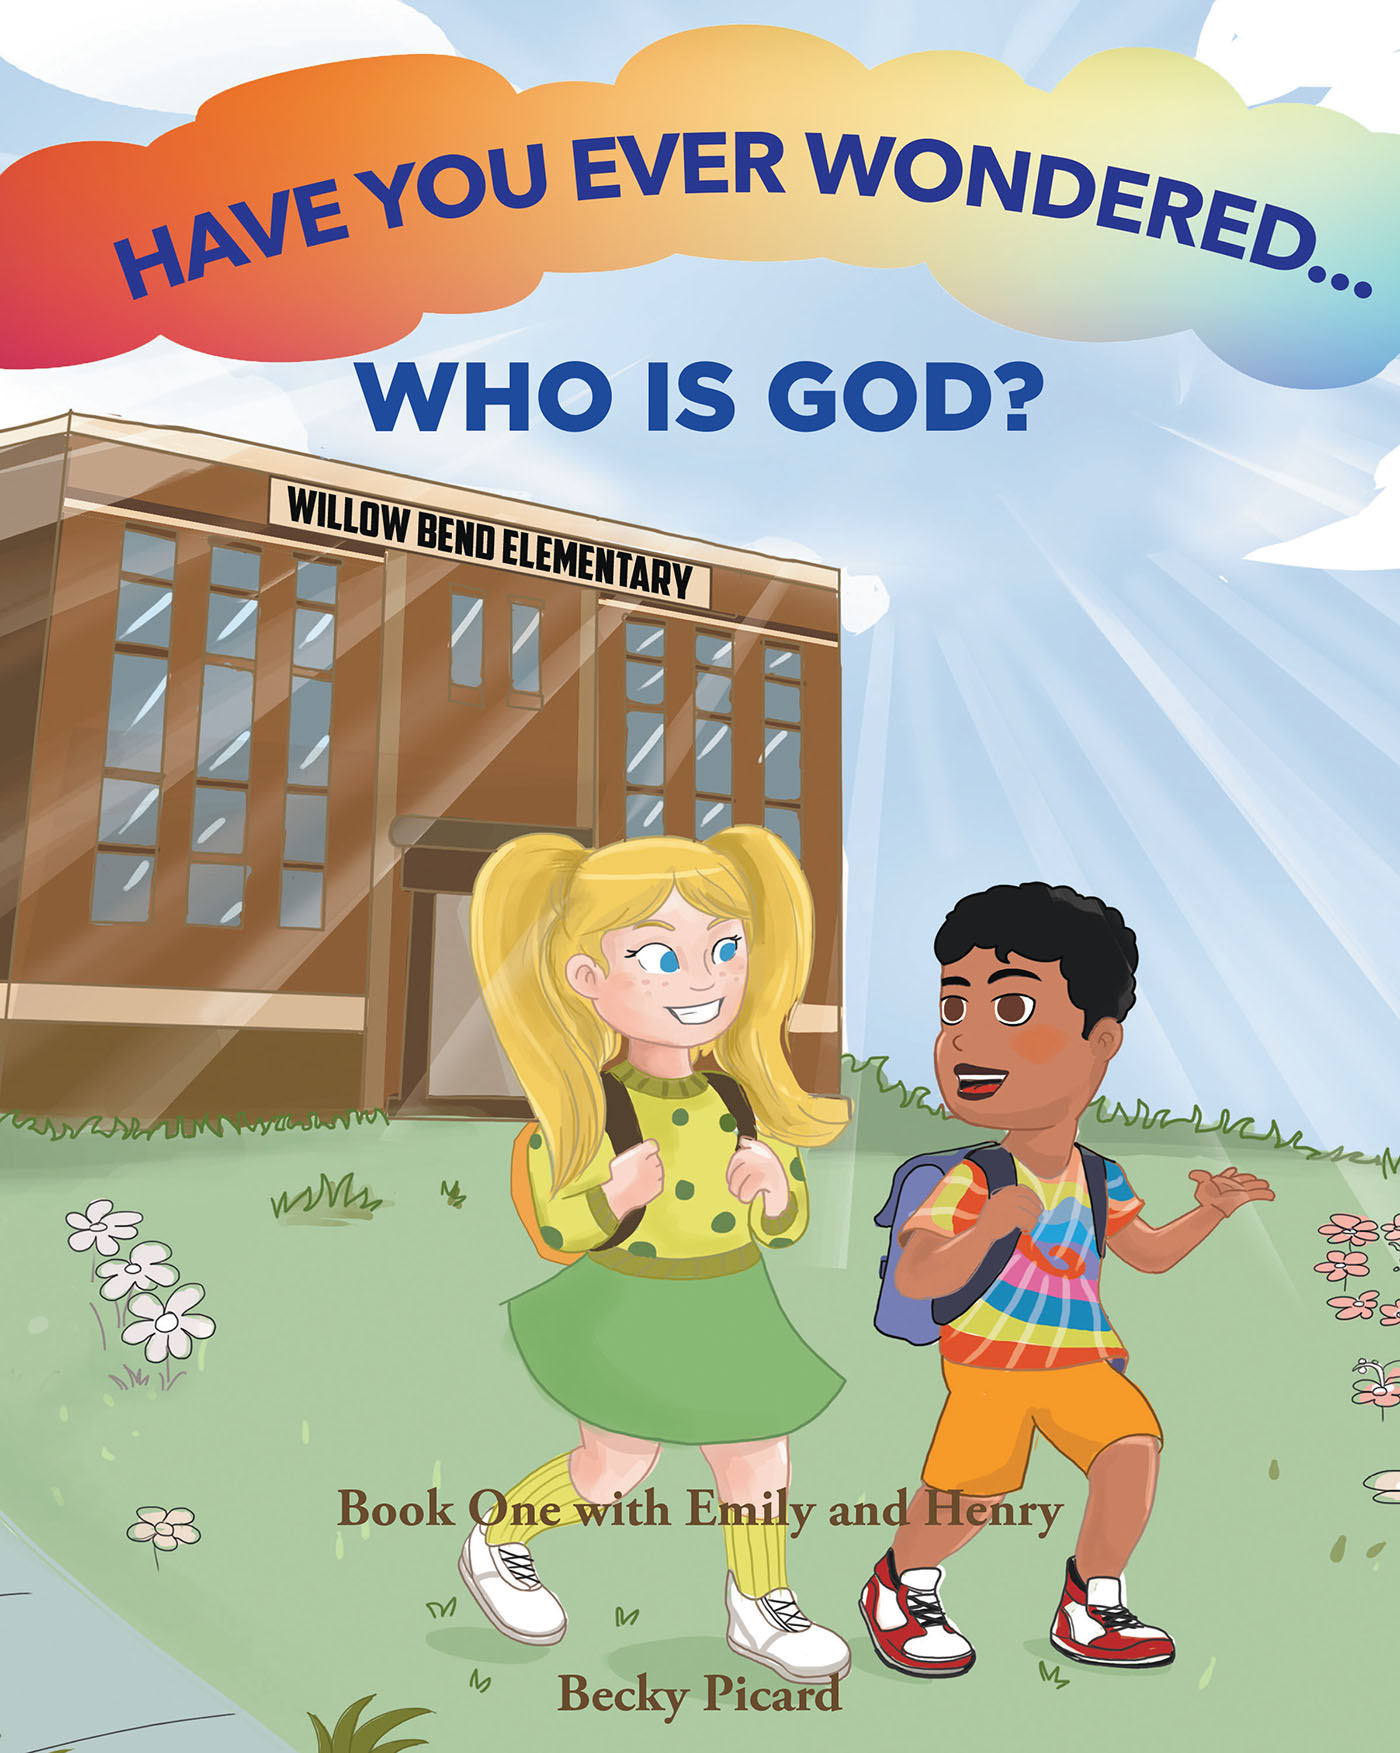 Becky Picard’s Newly Released "Have You Ever Wondered... Who is God?" is an Engaging Children’s Narrative That Helps to Explain Key Foundations of Knowing God